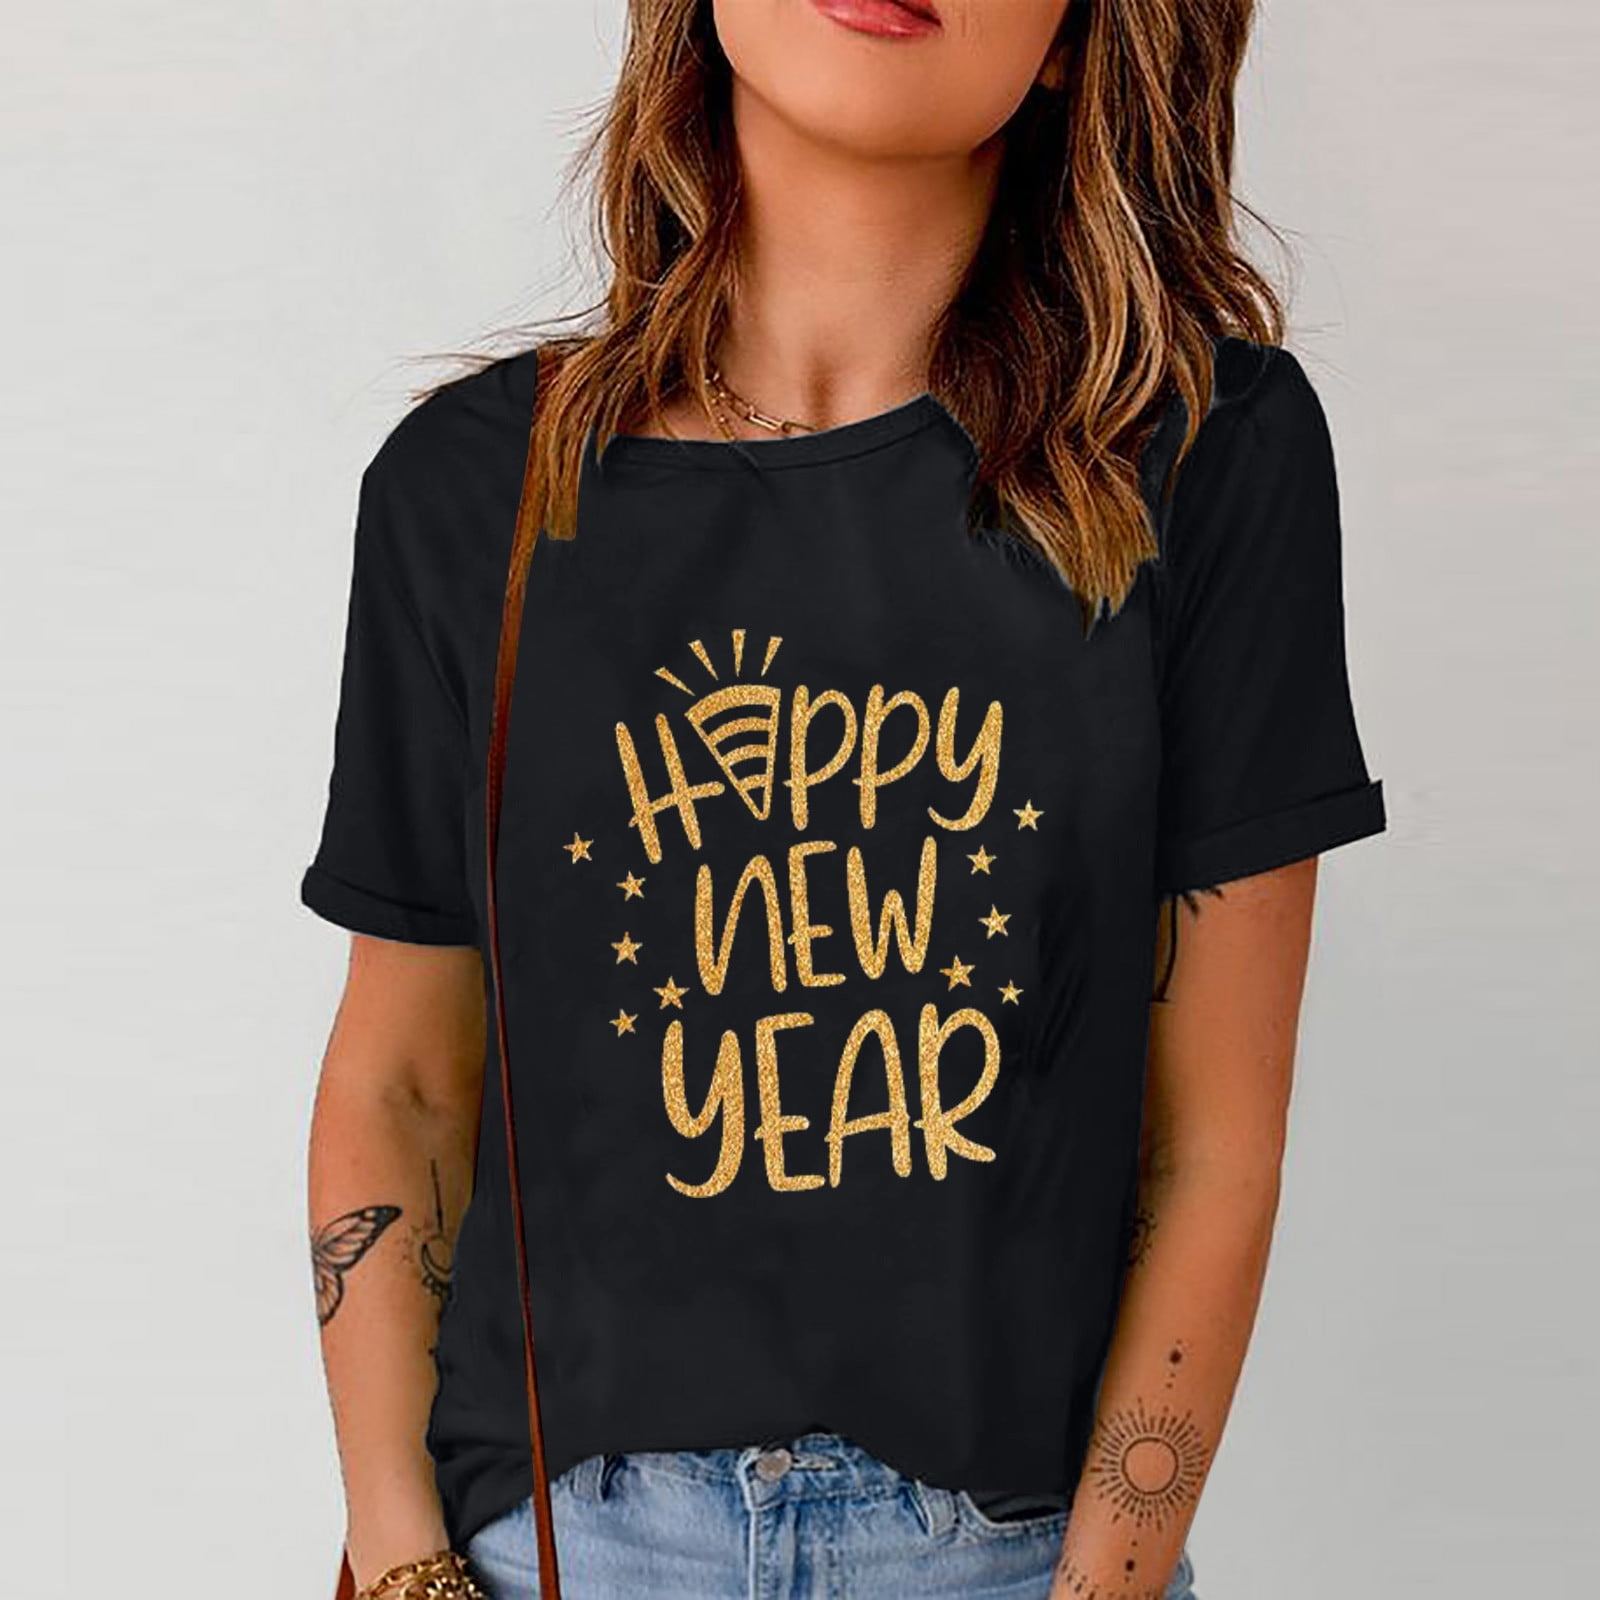 Happy New Years T-Shirt Sleeve Year 2023 Supplies Neck Short Shirts 2023 Round Eve New Tee Party